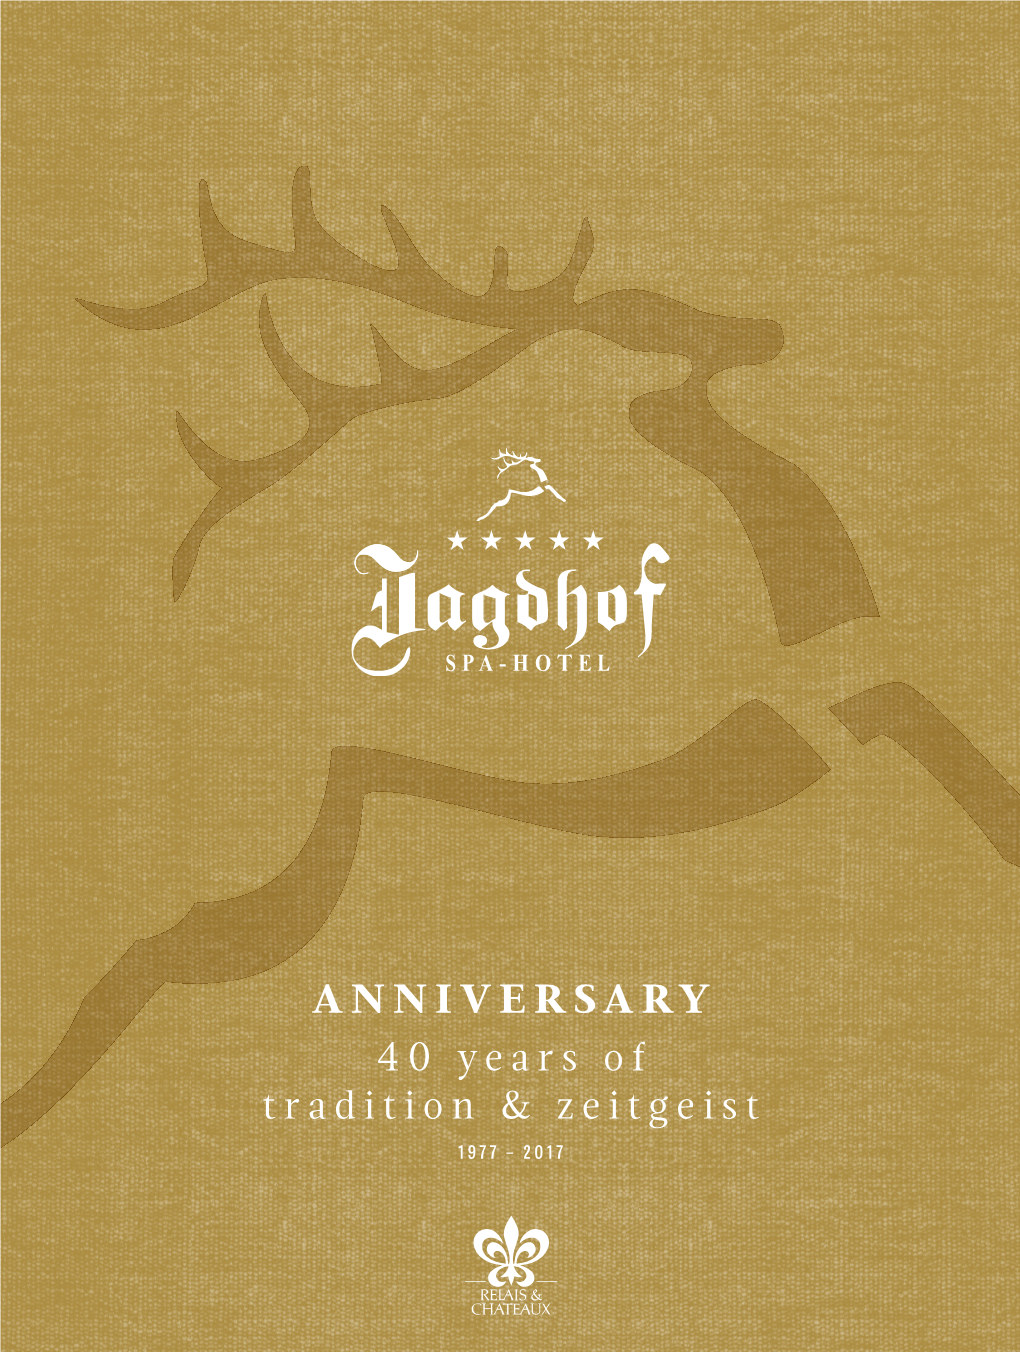 The SPA-HOTEL Jagdhof Is 40 Celebrate with Us!